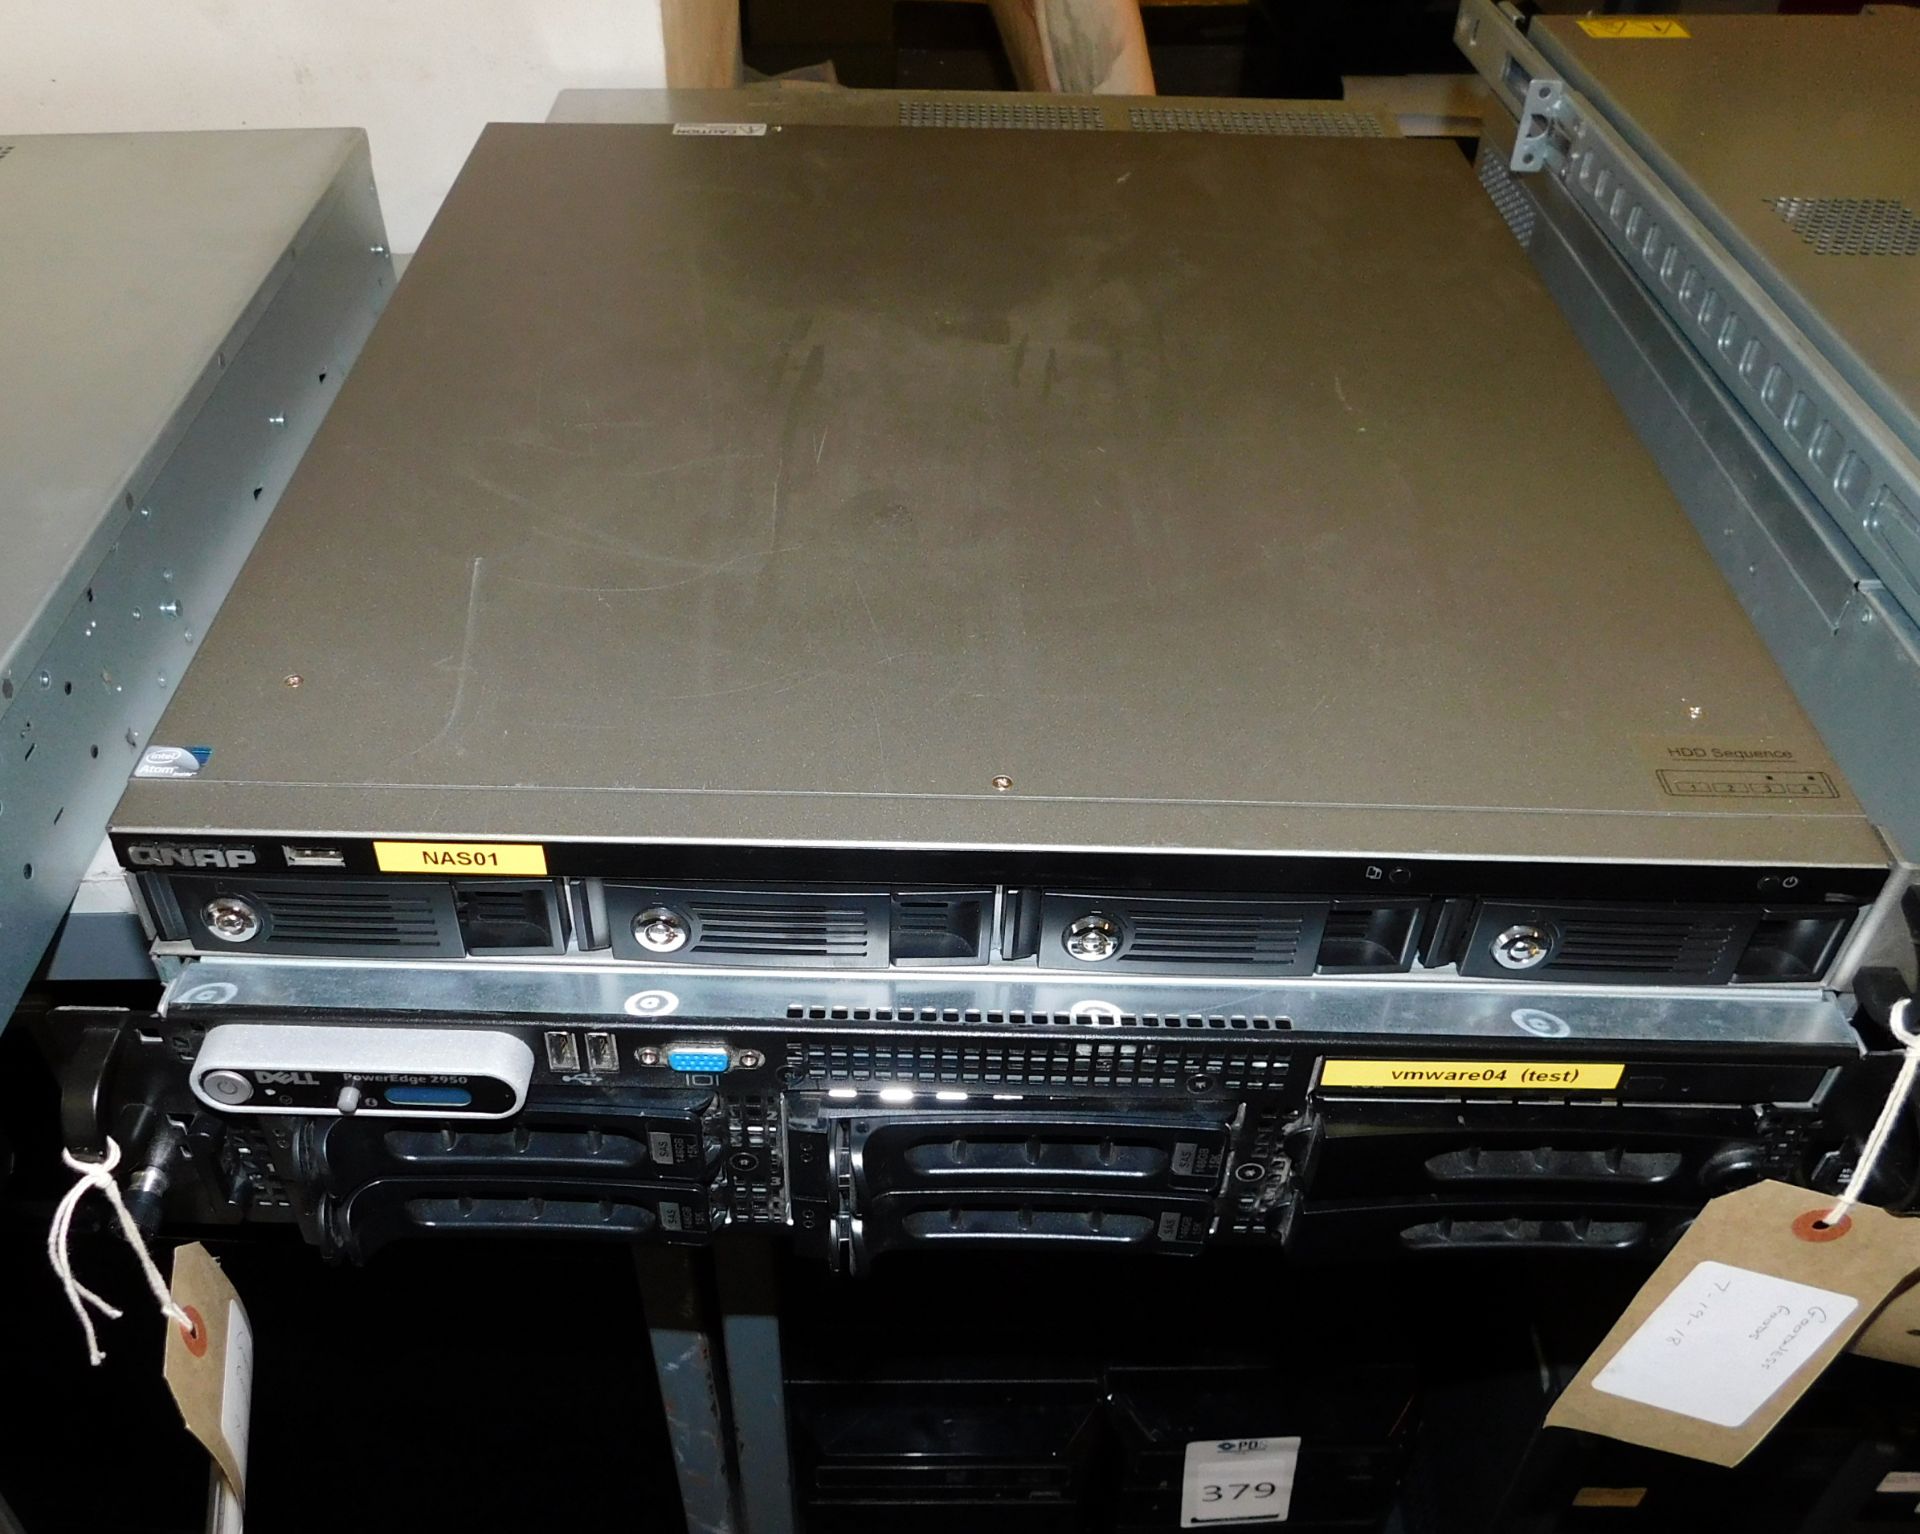 Dell PowerEdge 2950 Rack Mounting Sever (No HDD’s) with QNAP Backup Drive (No HDD’s) (Located